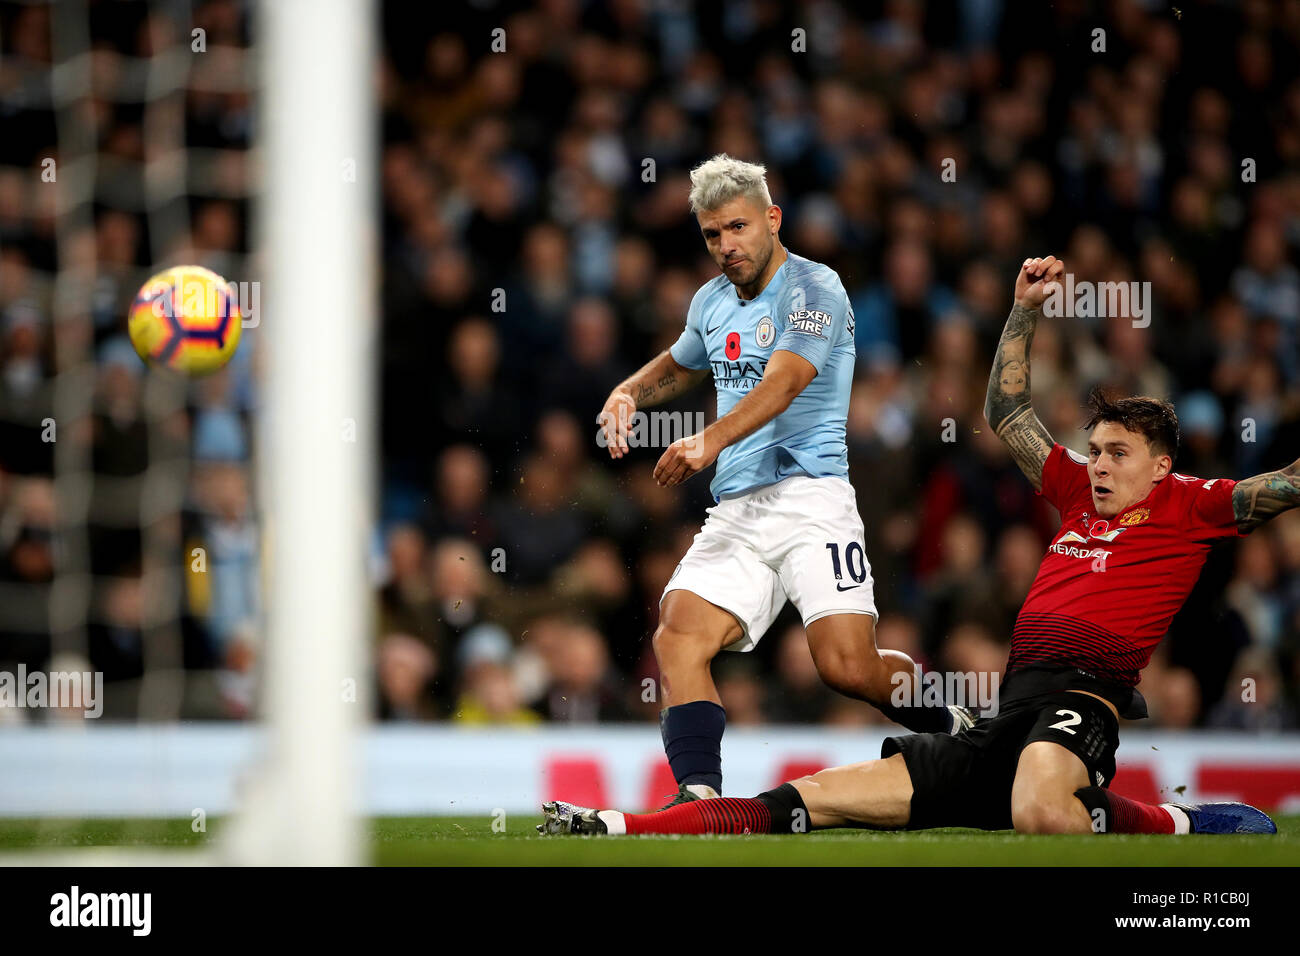 Manchester City's Sergio Aguero scores his side's second goal of the game during the Premier League match at the Etihad Stadium, Manchester. Stock Photo